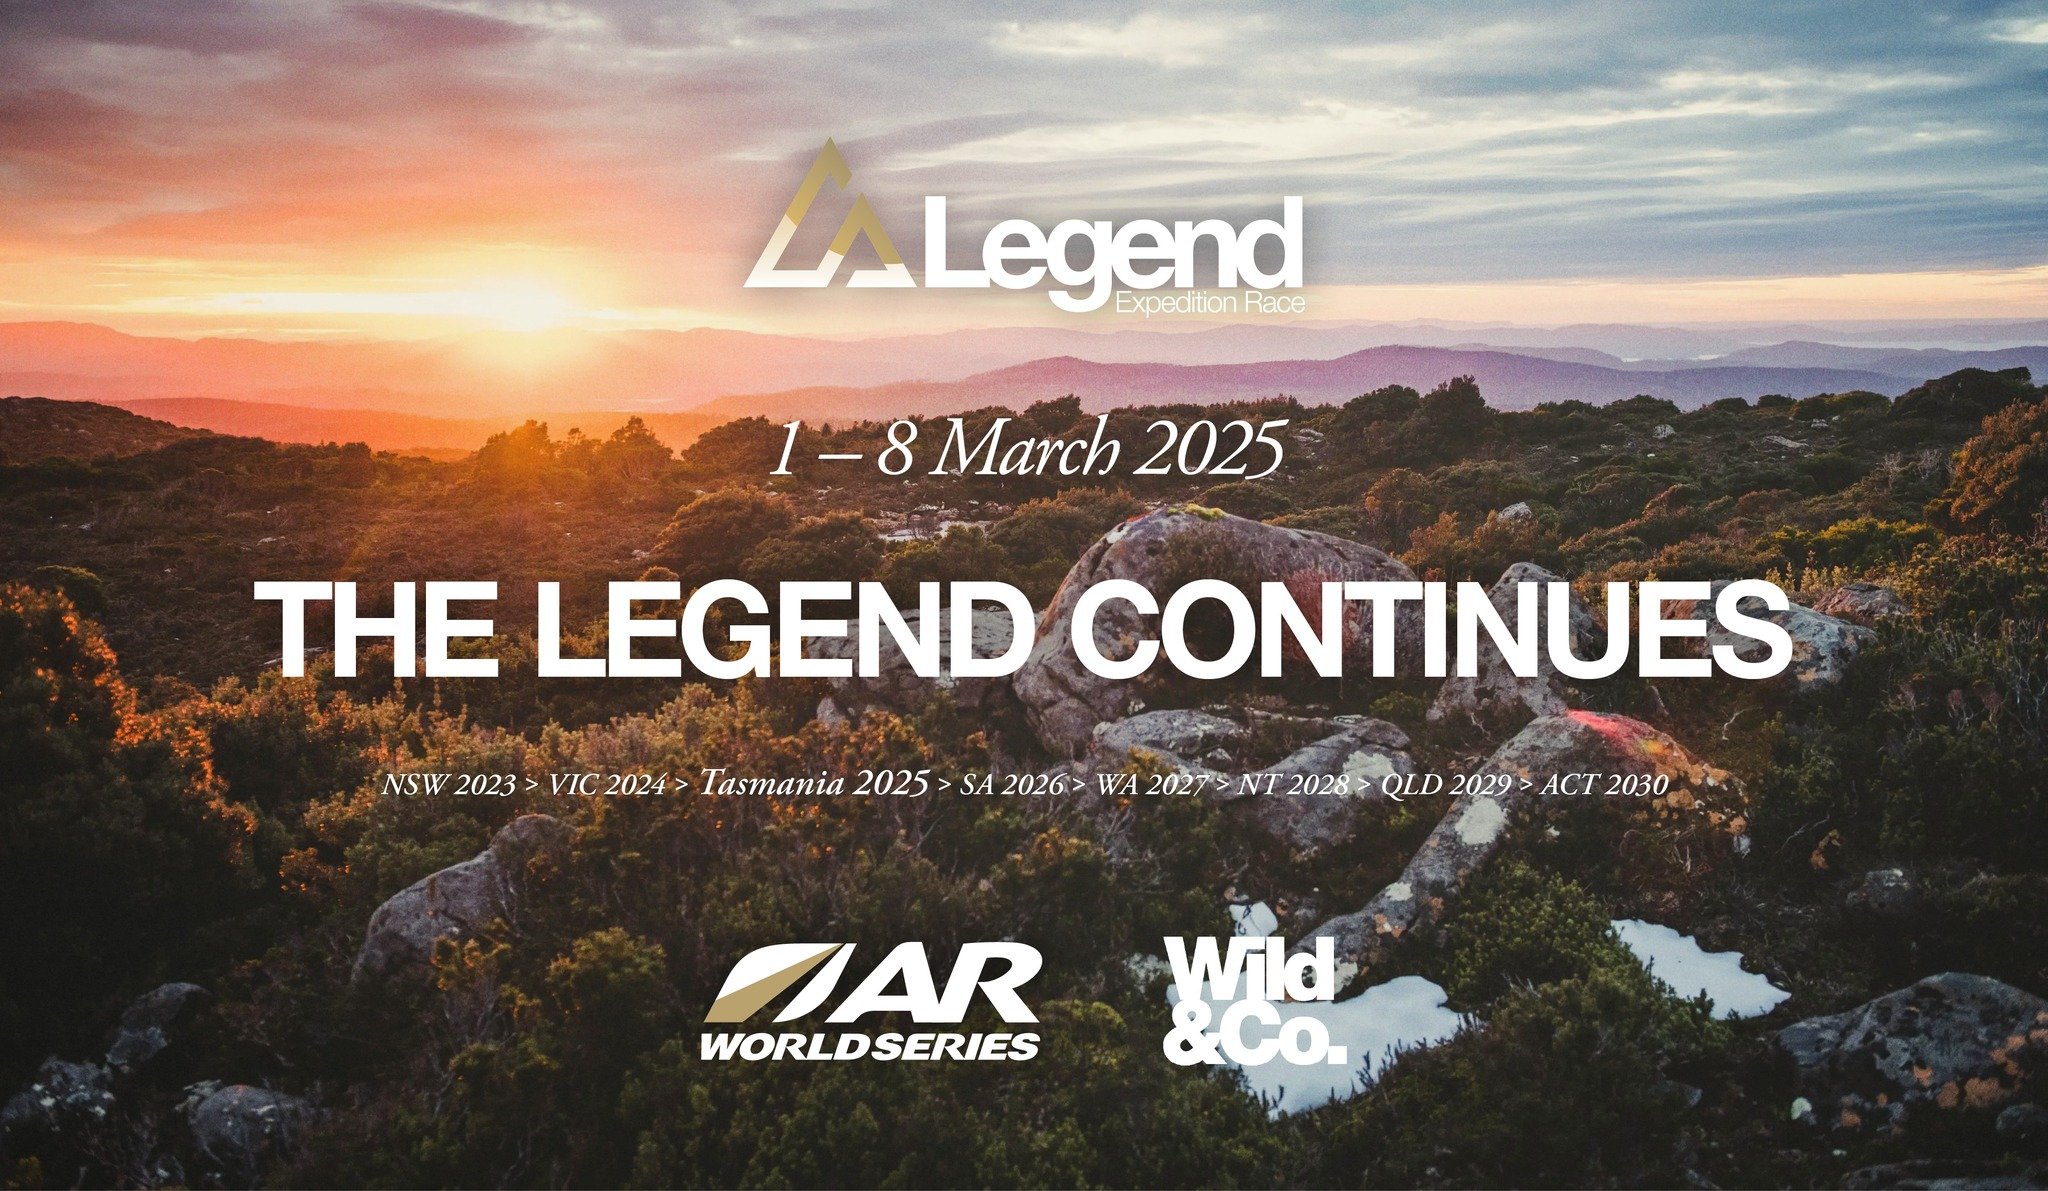 The Legend Expedition Race heads to one of the last true wilderness regions on Earth

The Legend expedition adventure race was launched by Wild&amp;Co in 2023 as part of the Adventure Racing World Series. In the first race teams crossed the Alpine mo